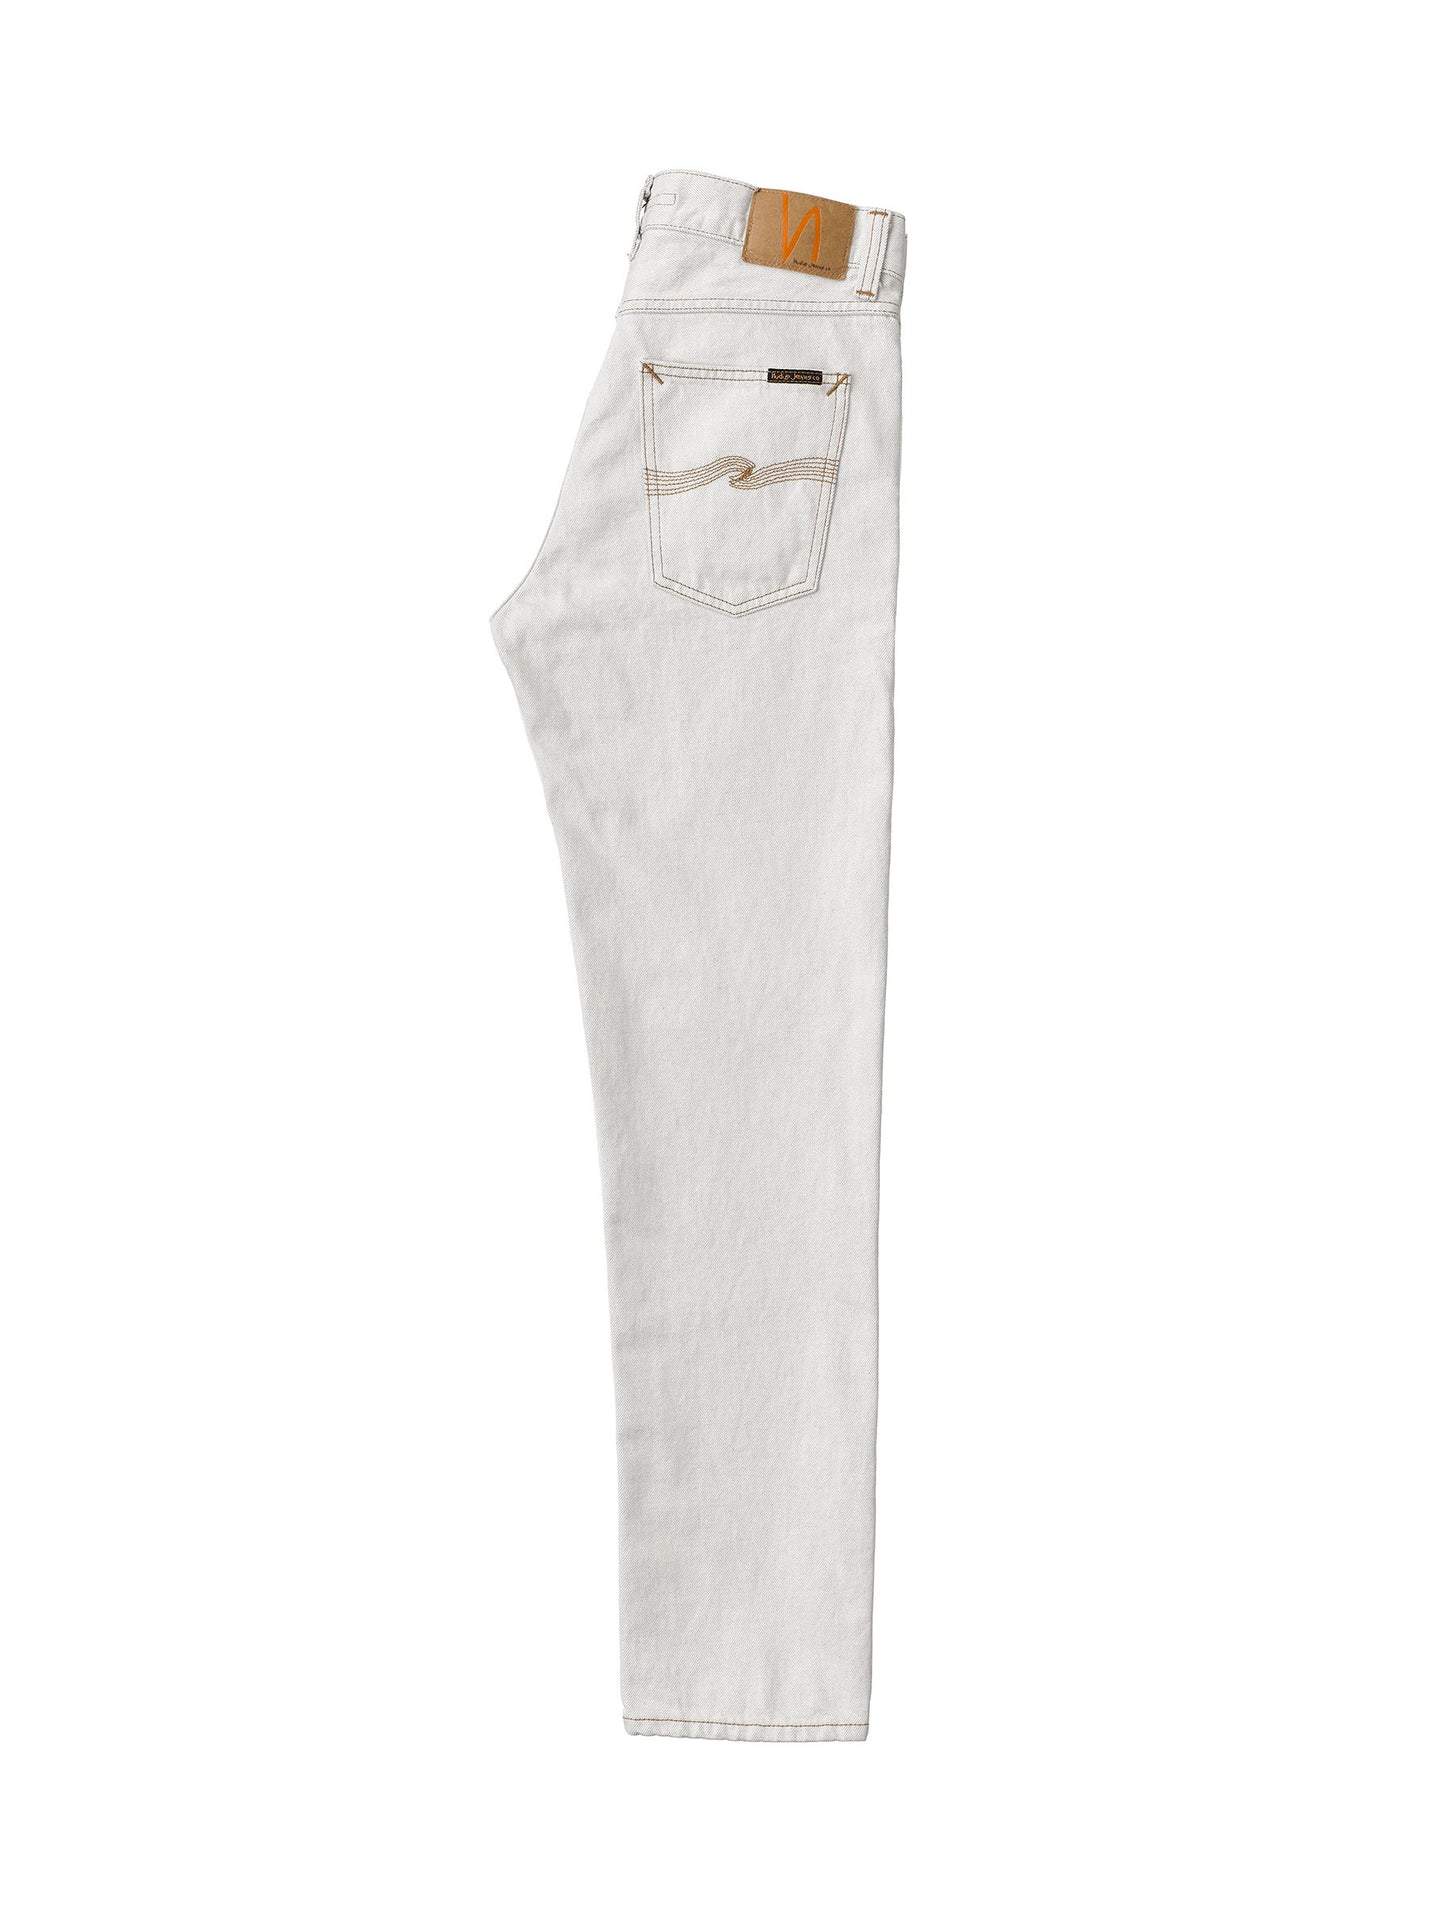 Nudie Jeans Gritty Jackson Jean L34 Clay White